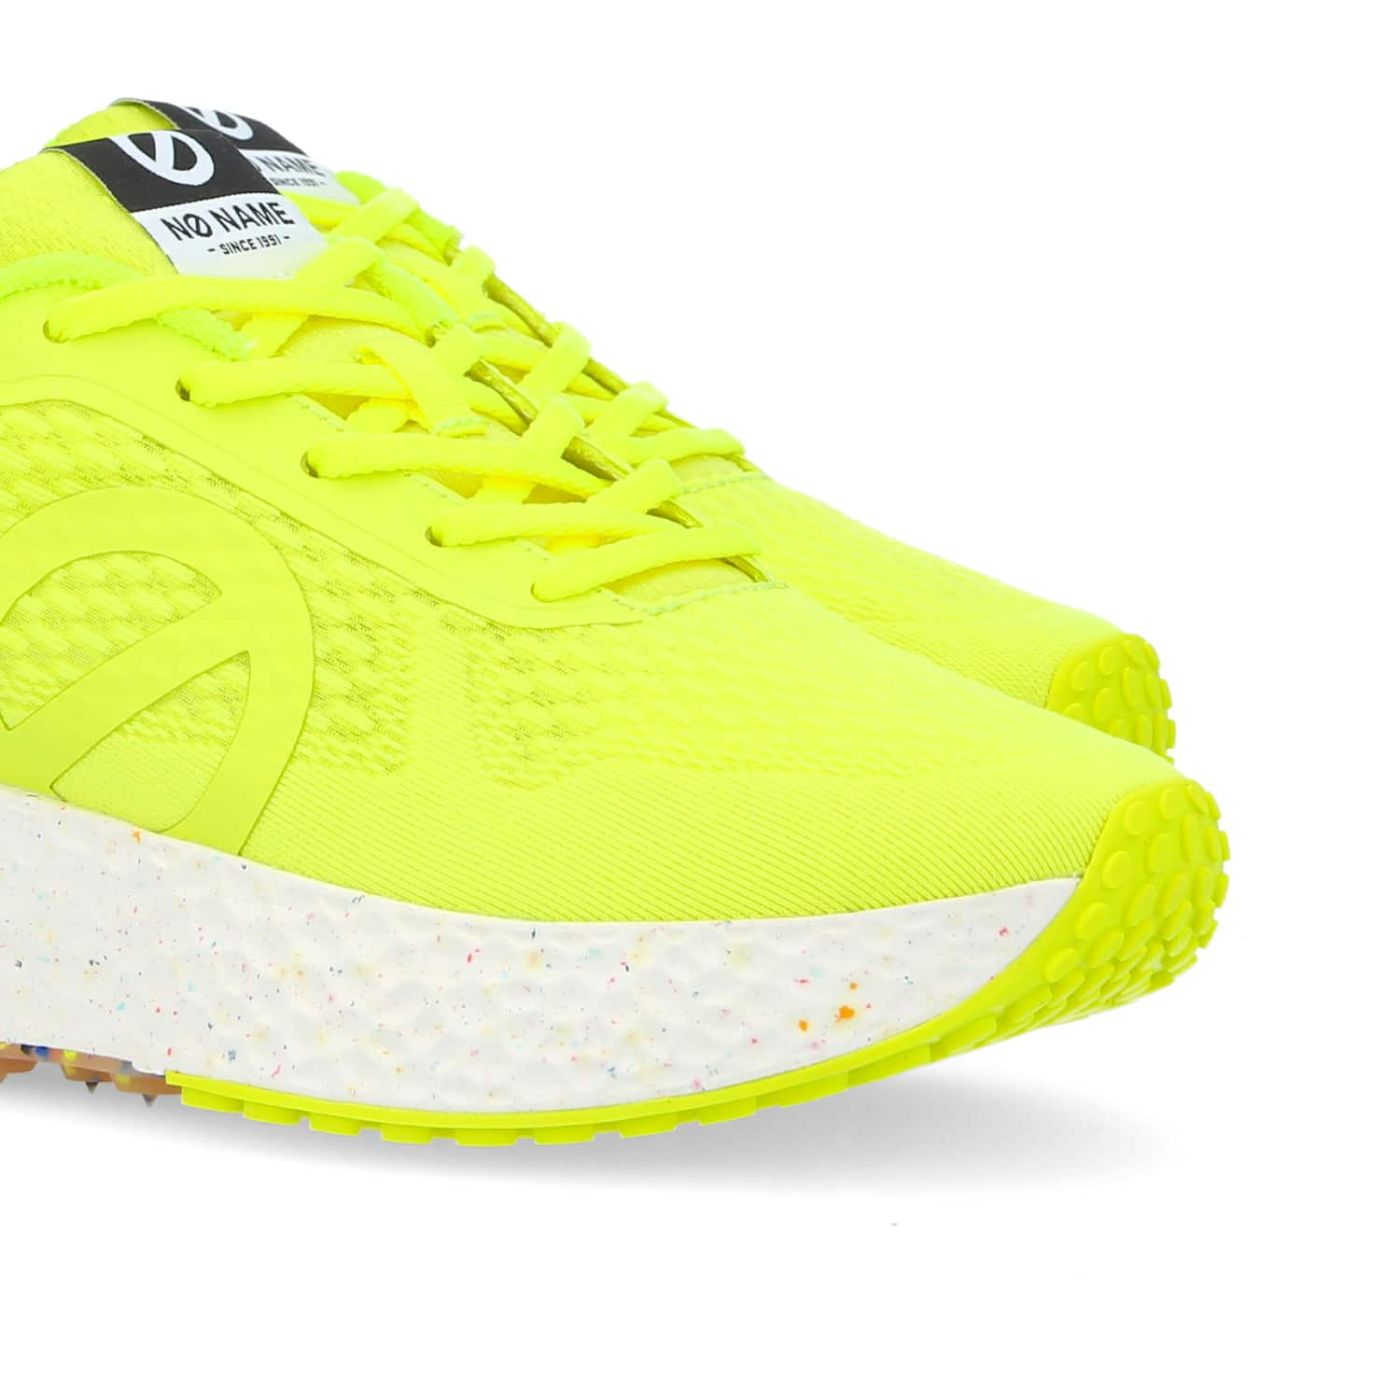 CARTER FLY W - MESH RECYCLED - FLUO YELLOW